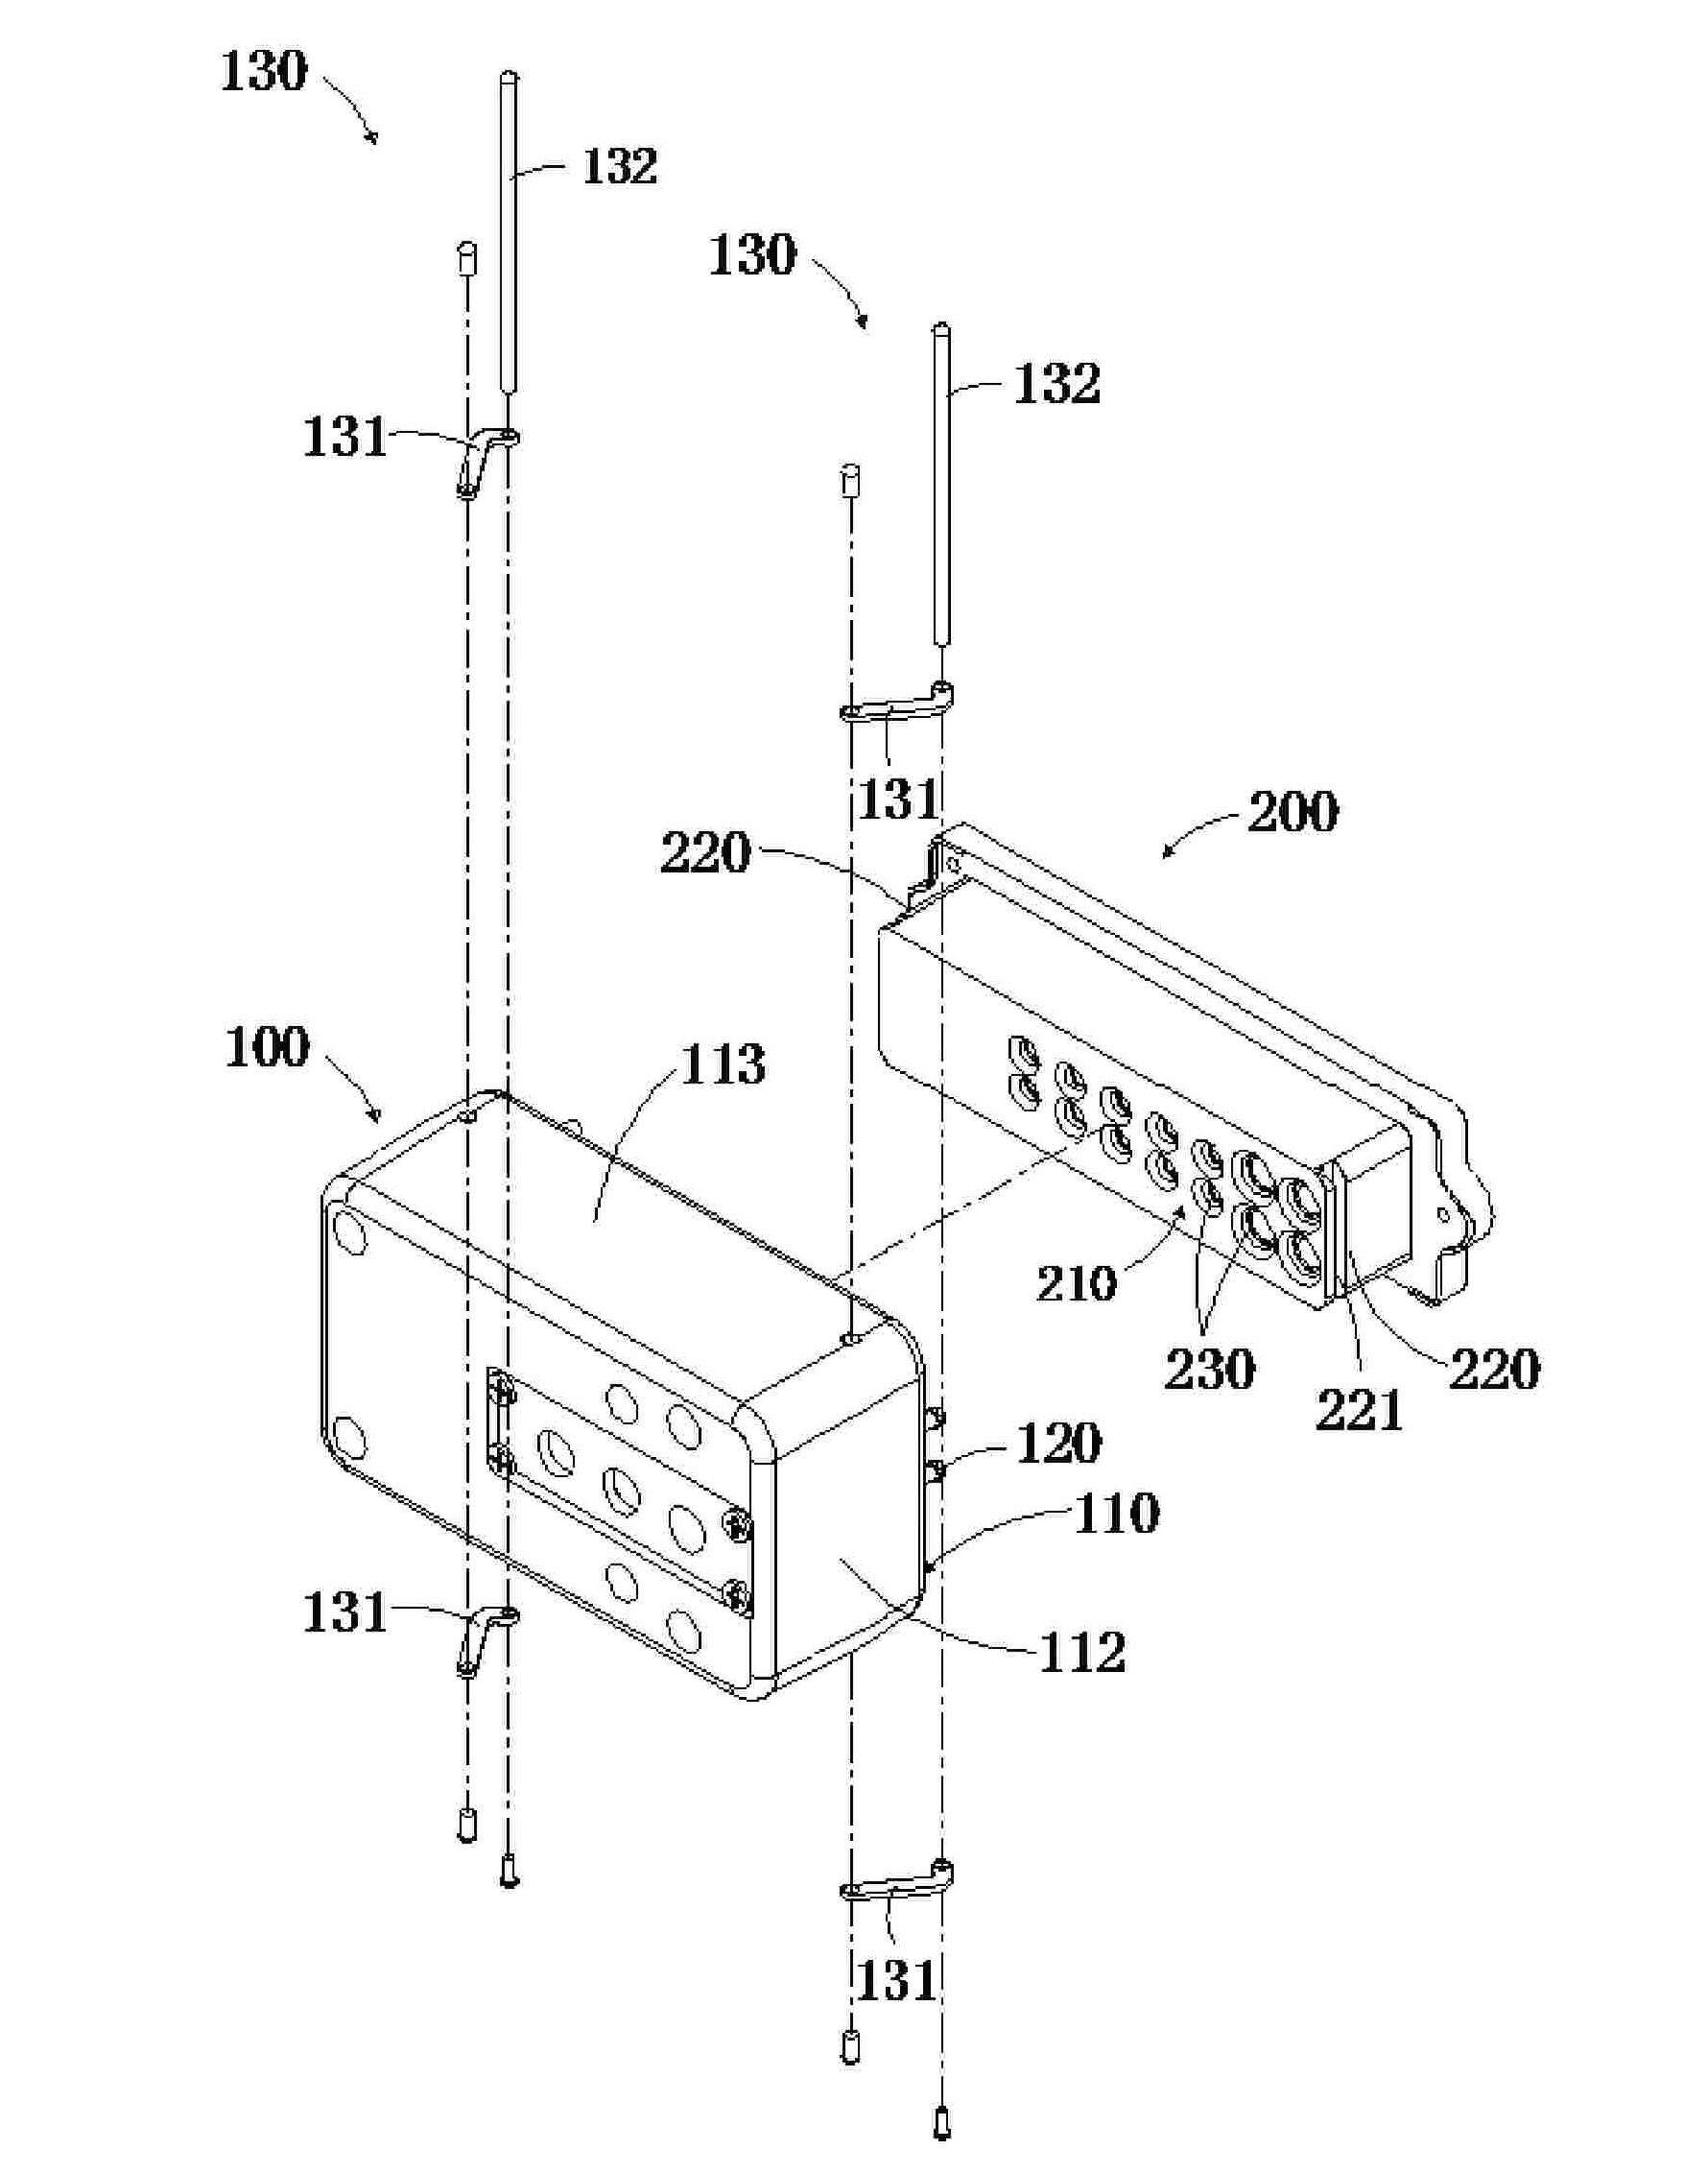 Electric connector and electric coupler assembly